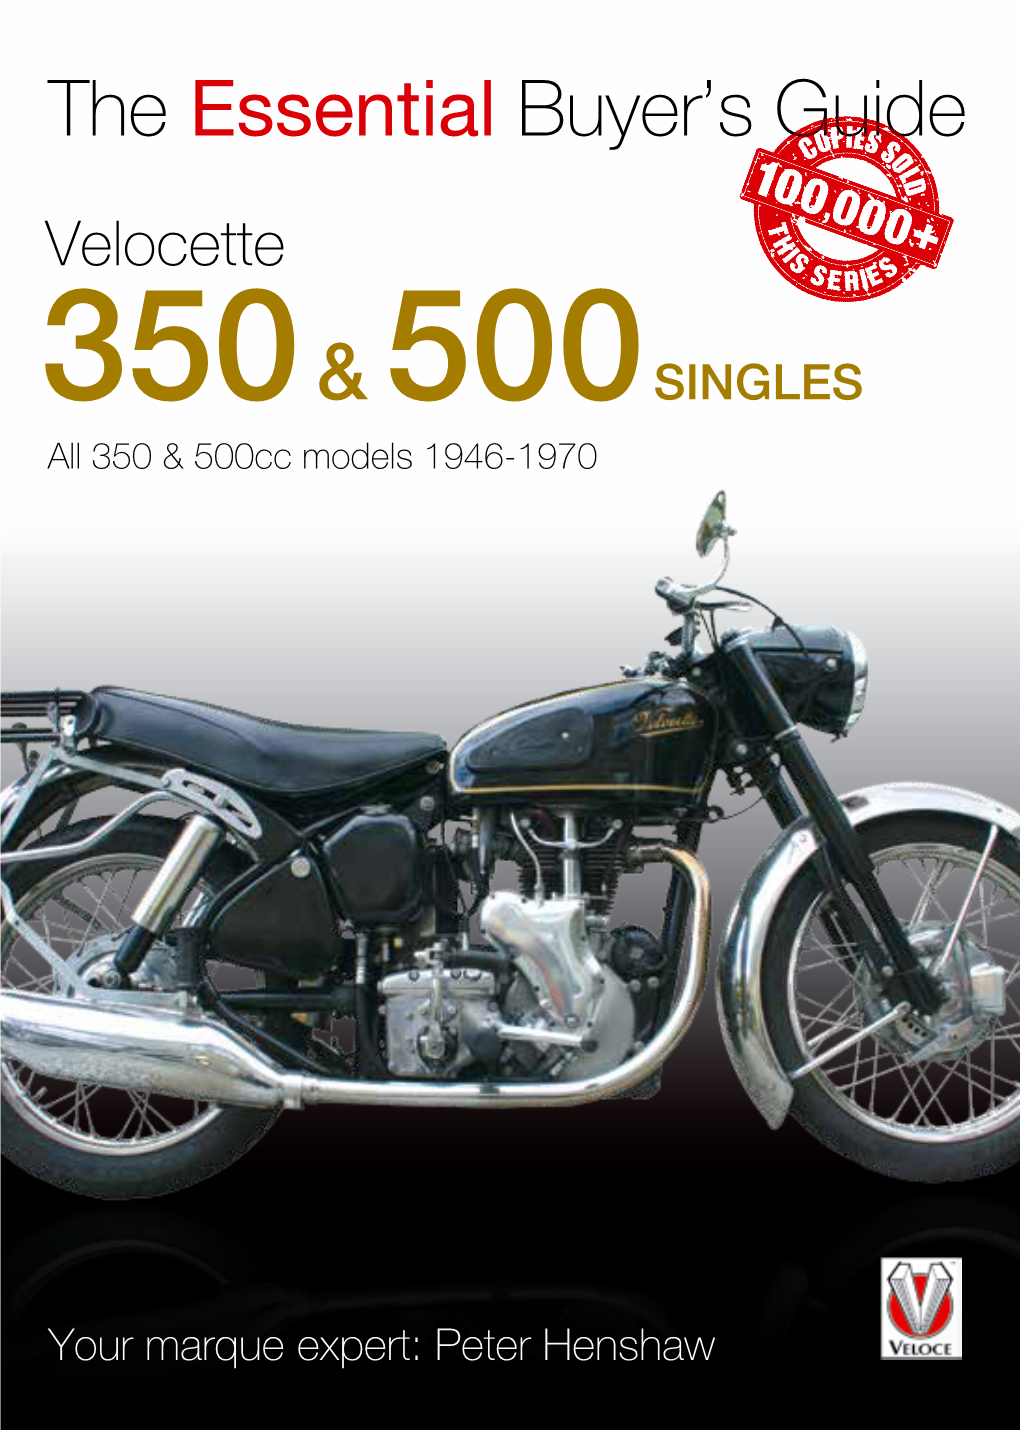 The Essential Buyer’S Guide Velocette 350 & 500 SINGLES 1946-1970 Veloce 2 1 4 9 4 8 5 4 8 1 8 7 ISBN 978-1-845849-41-2 9 Covers STOP! Your Dreams